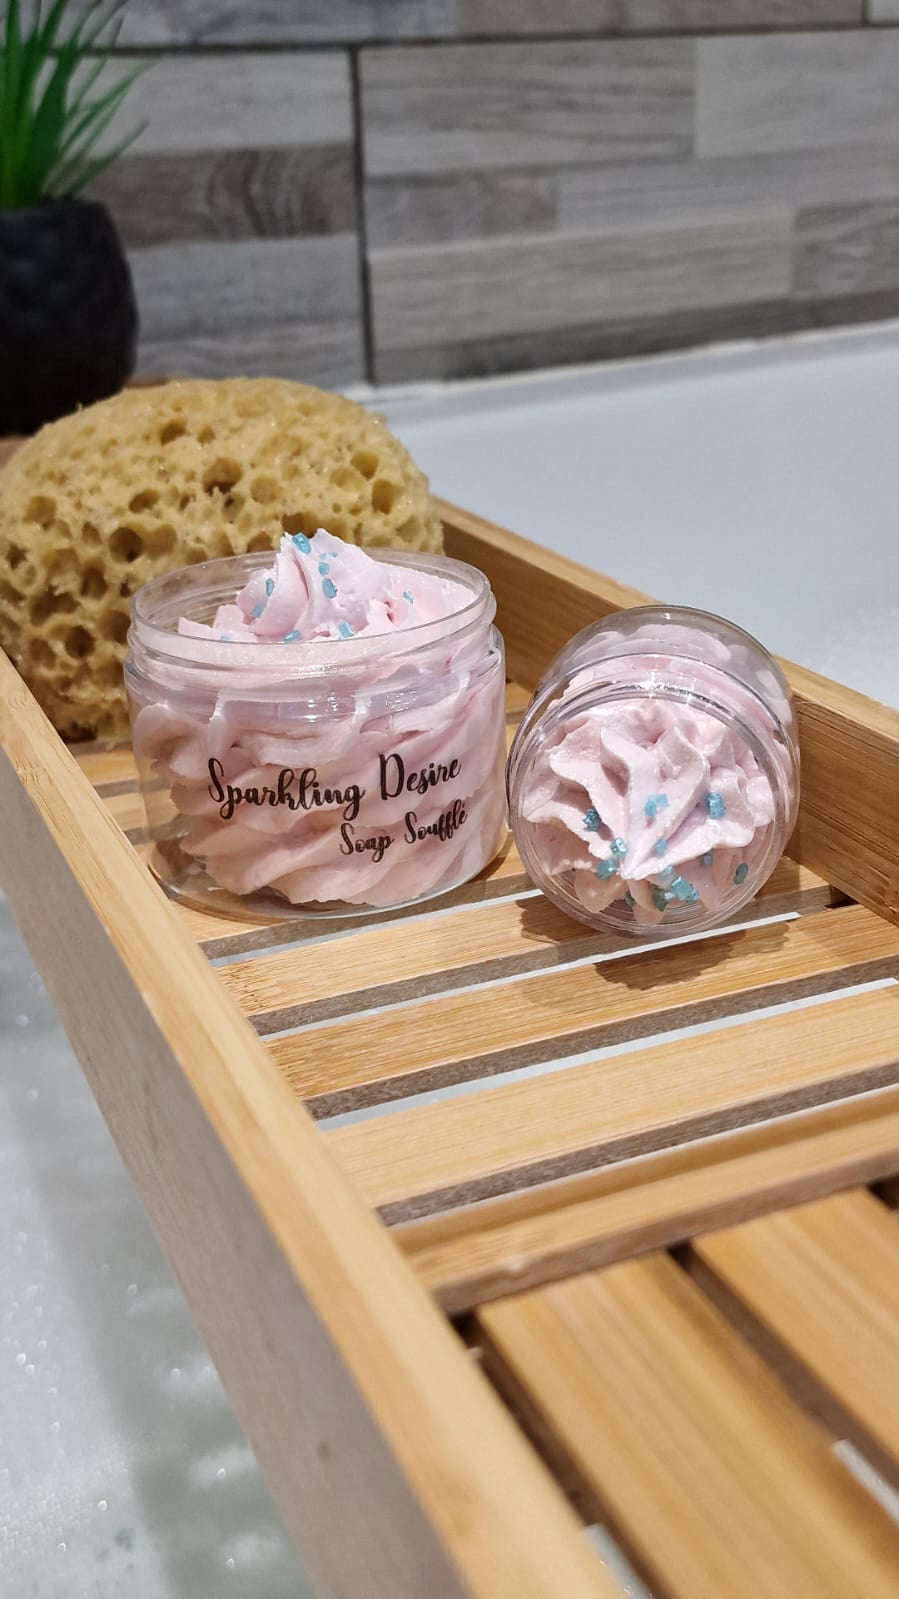 Sparkling Desire Whipped Soap